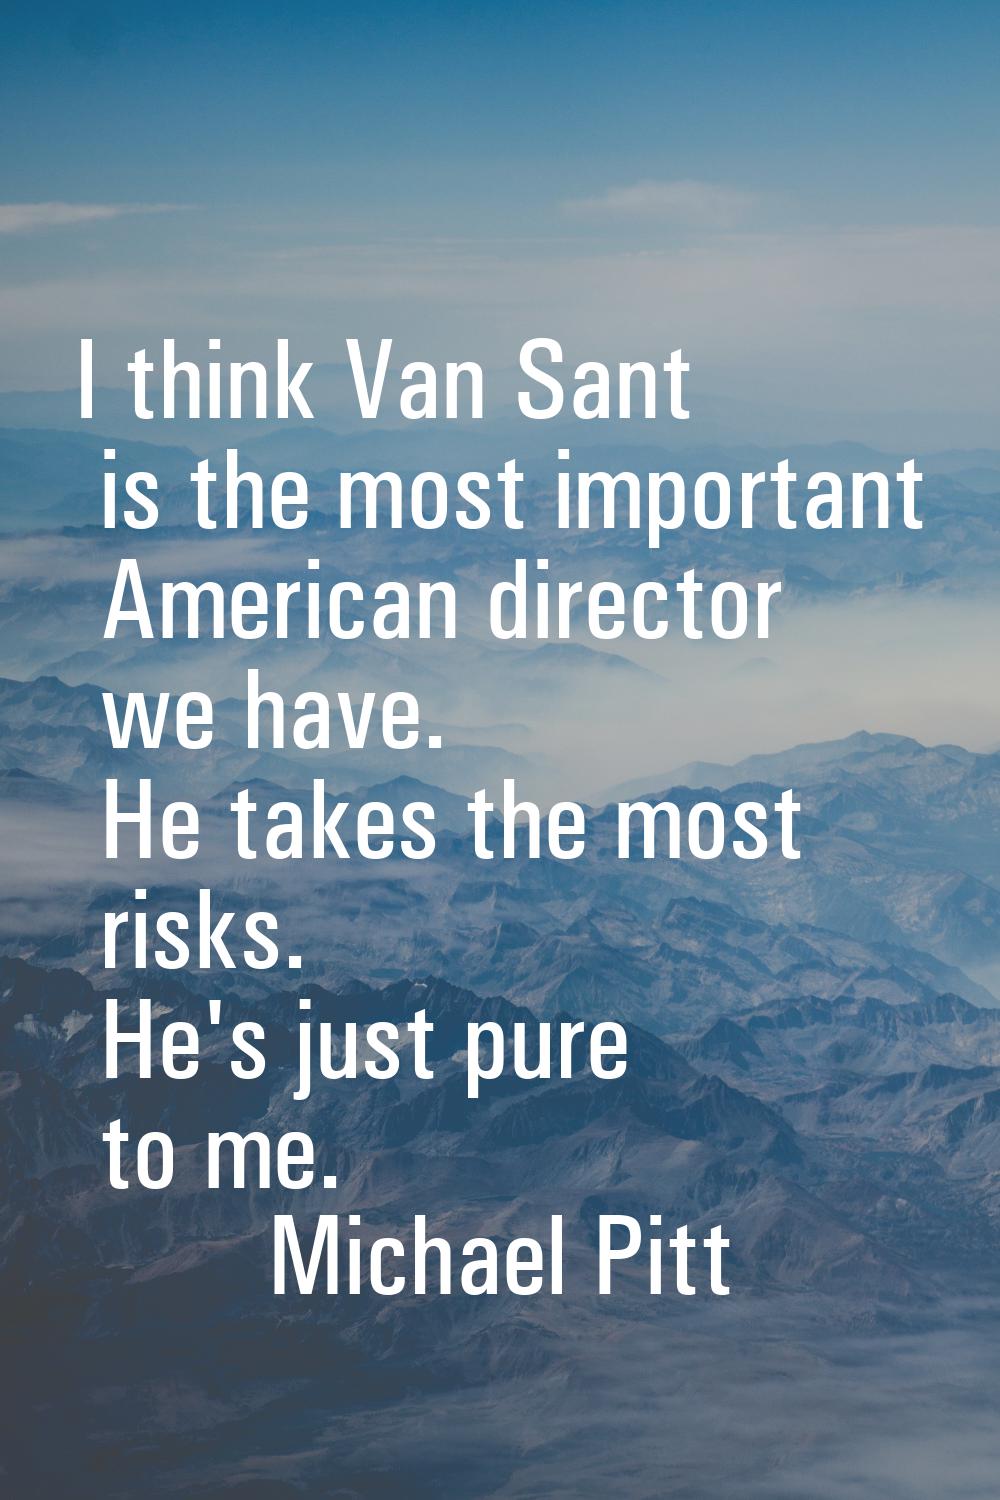 I think Van Sant is the most important American director we have. He takes the most risks. He's jus